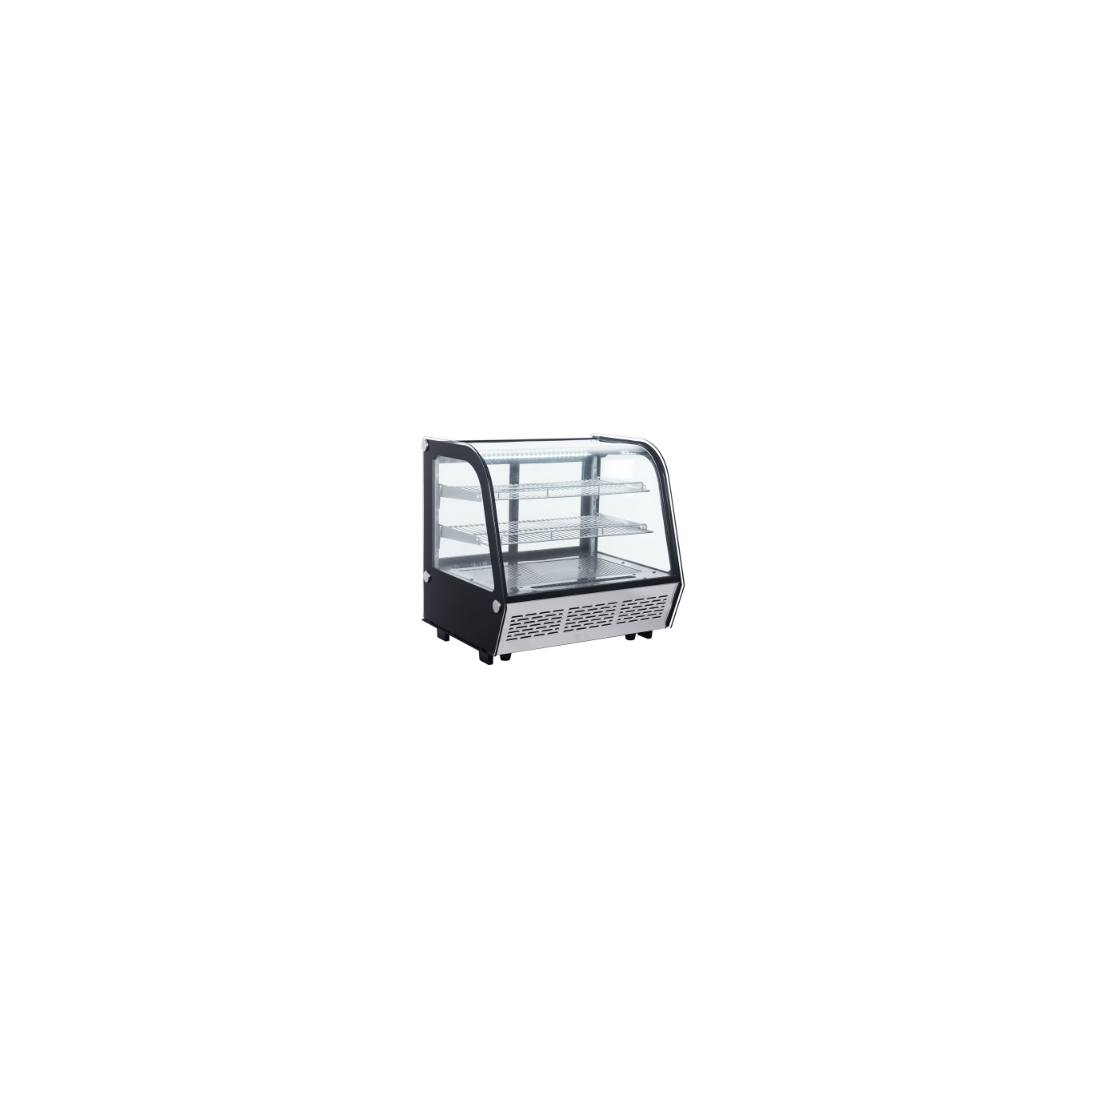 OMAJ XCW-120L Cake Display Chiller Countertop Curved Glass  -70cm